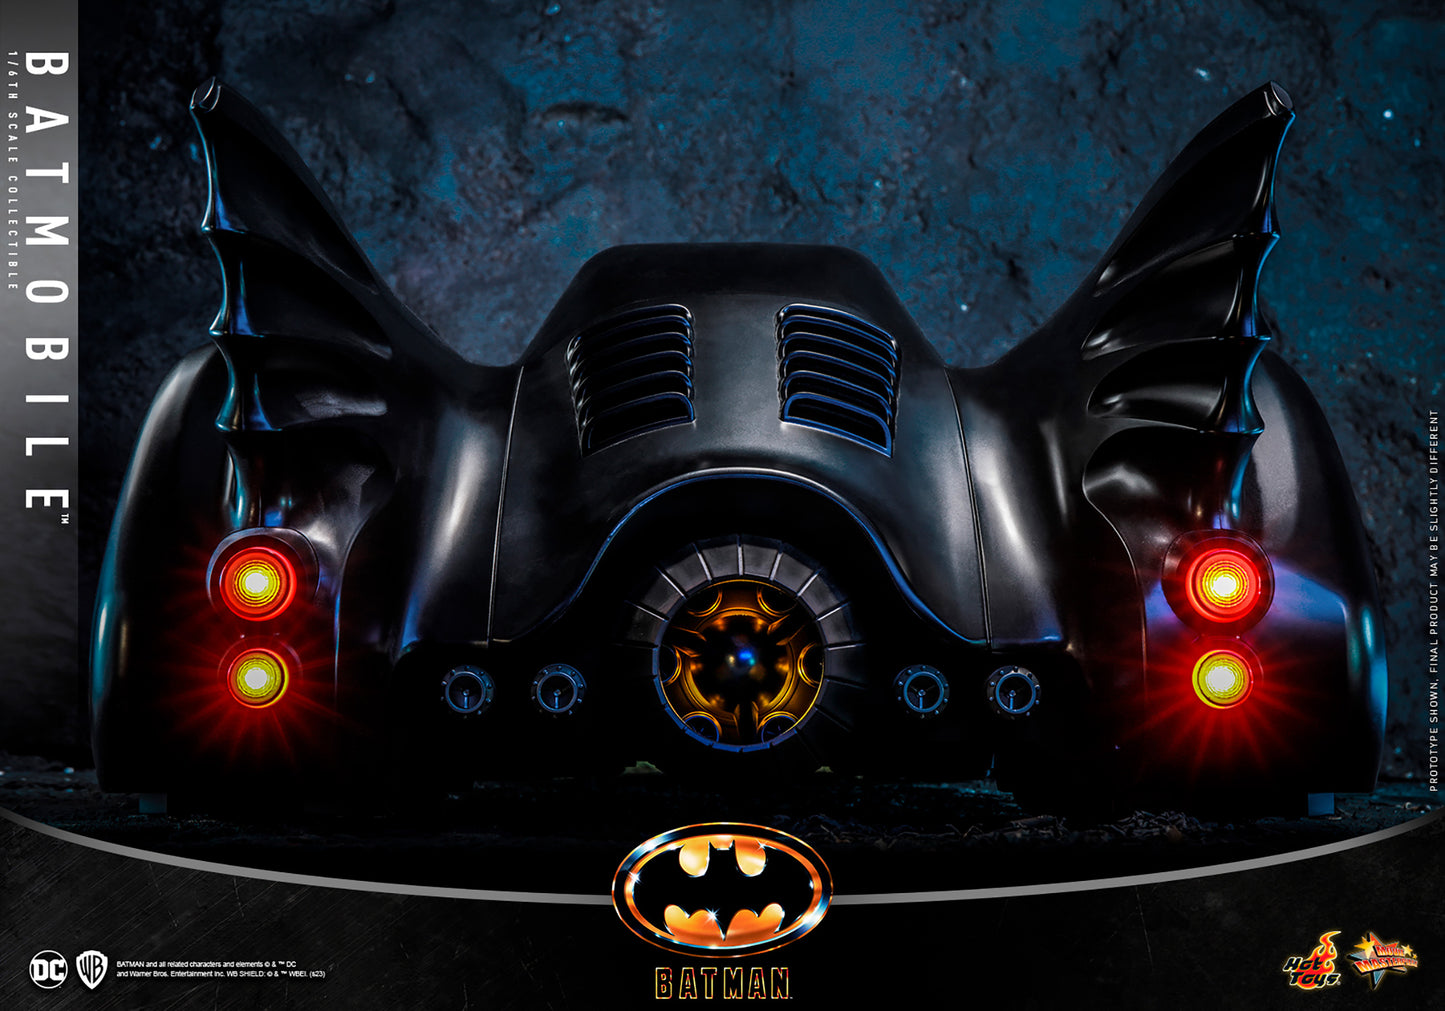 1989 Batmobile Sixth Scale Figure Accessory by Hot Toys